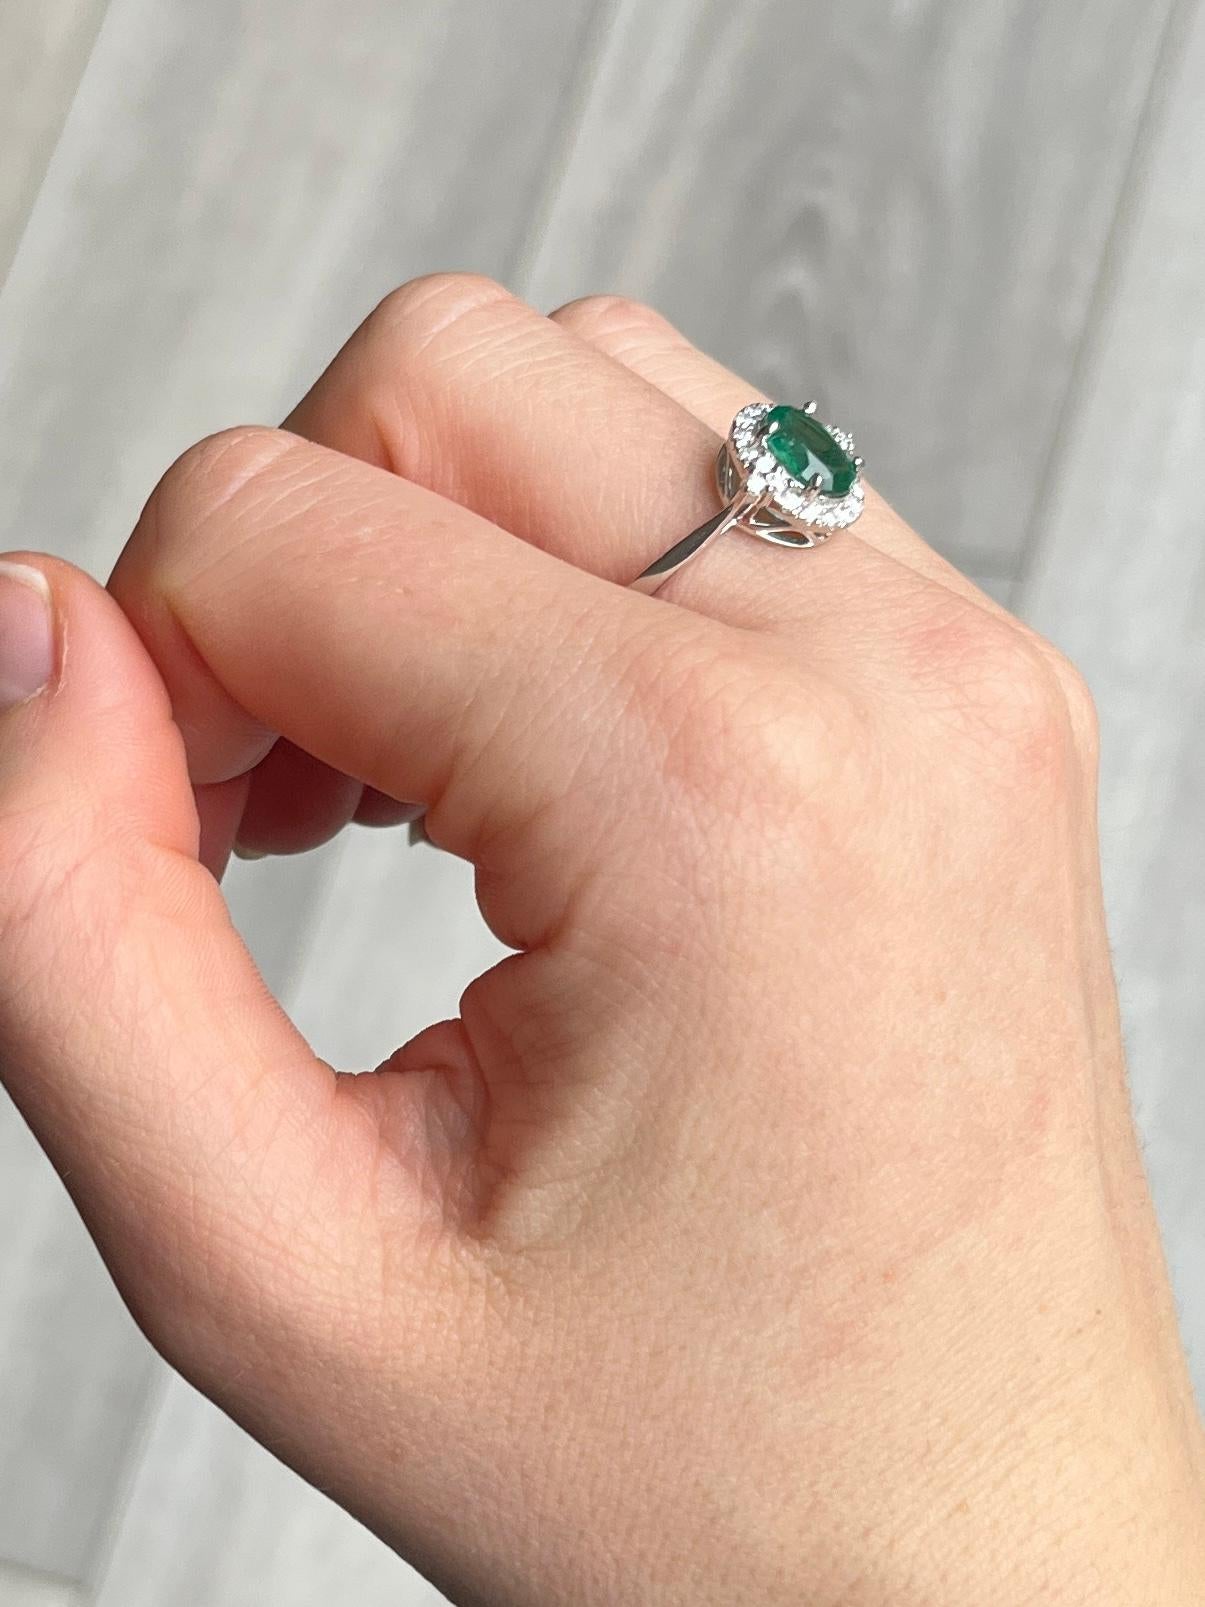 This stunning ring holds a bright green emerald measuring 1 carat. Surrounding the stone is a halo of sparkling diamonds which totals 80pts. The ring is modelled in platinum.

Ring Size: P 1/2 or 8 
Cluster Dimensions: 11.5x10mm
Height off finger: